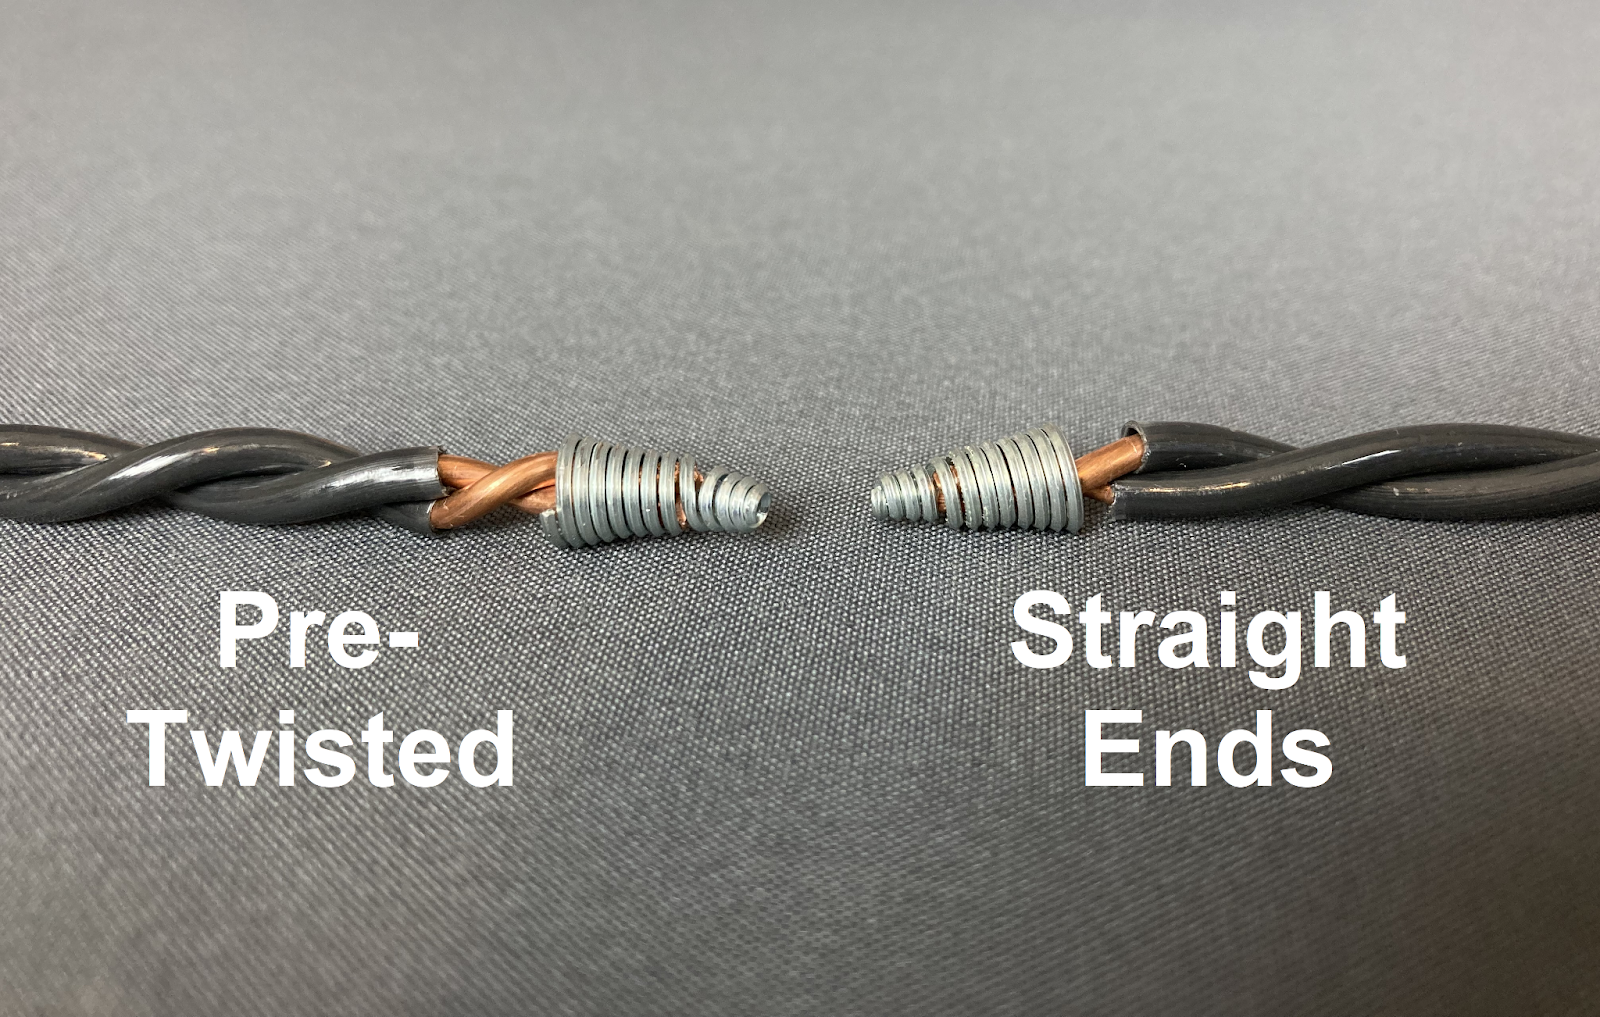 Connections made by pre-twisting (left) and leaving the conductors un-twisted (right) are virtually the same.